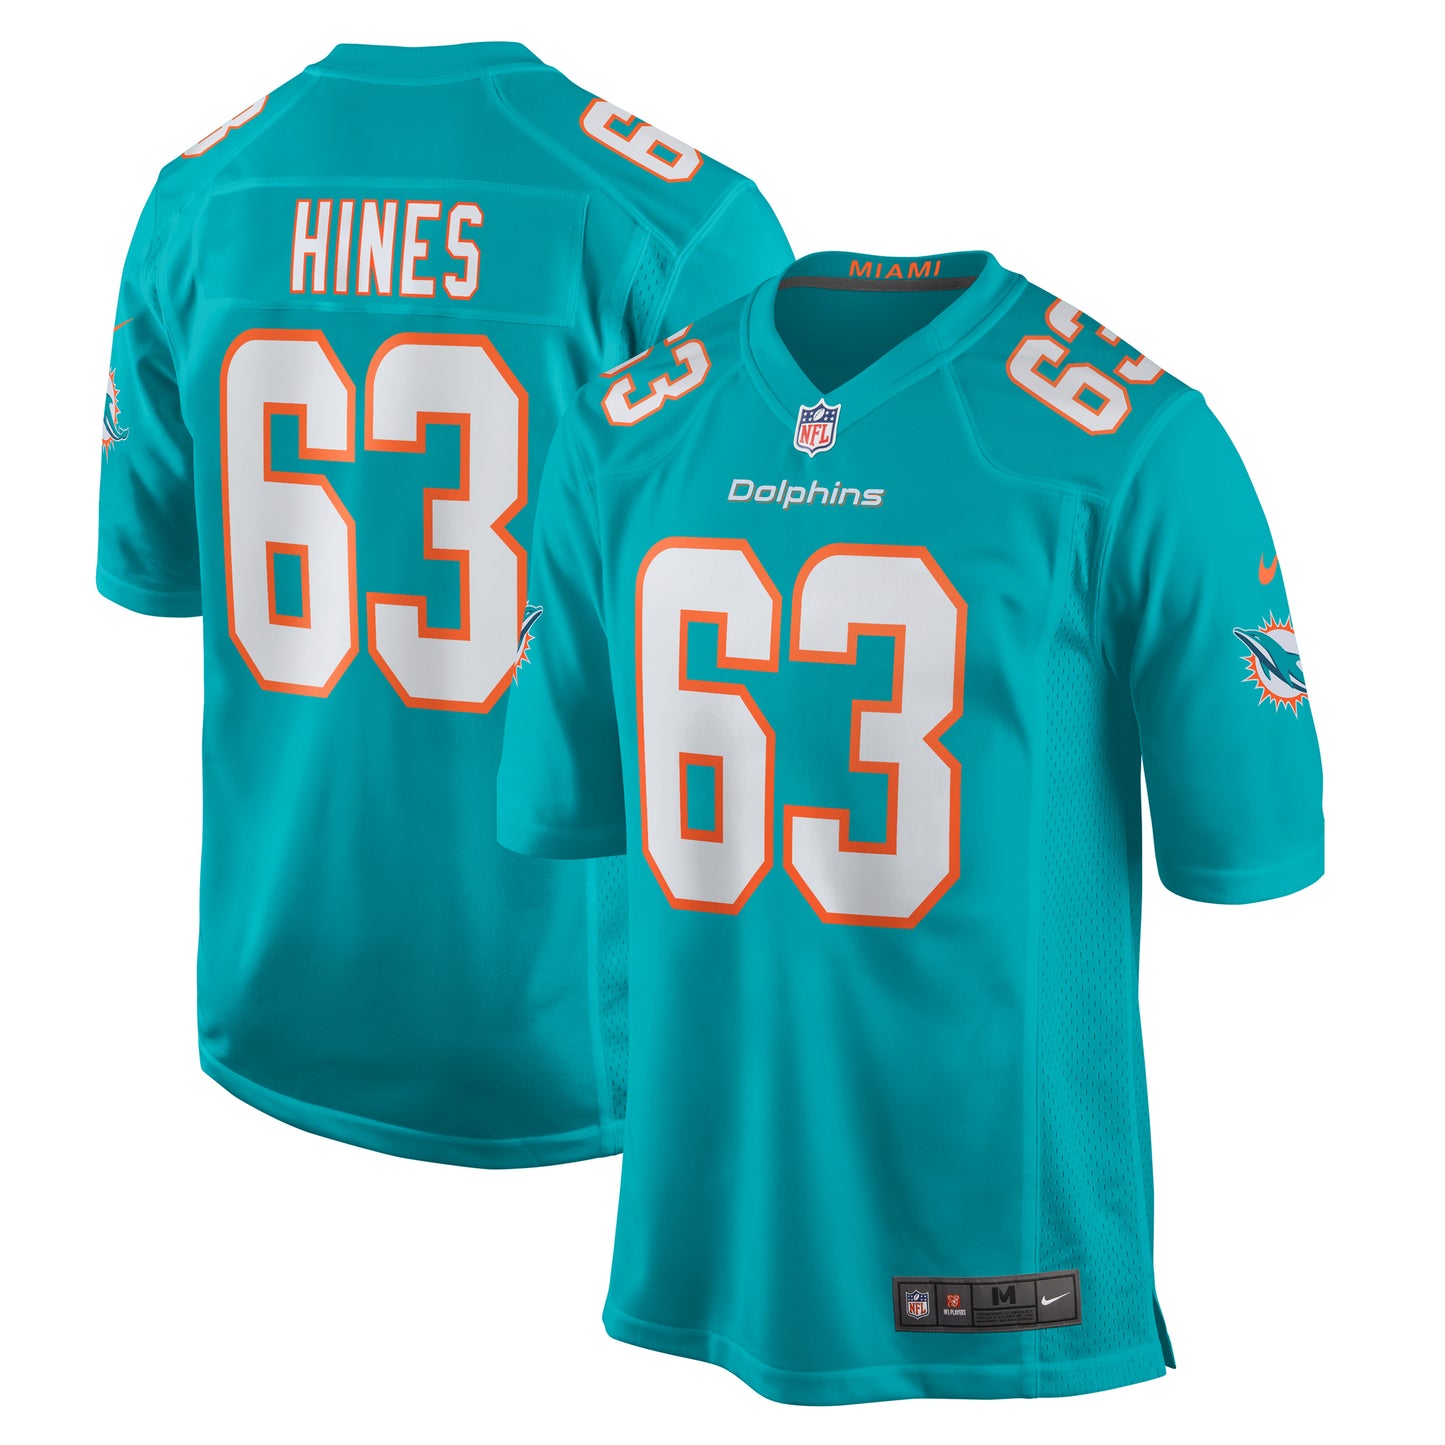 Chasen Hines Miami Dolphins Nike Team Game Jersey - Aqua